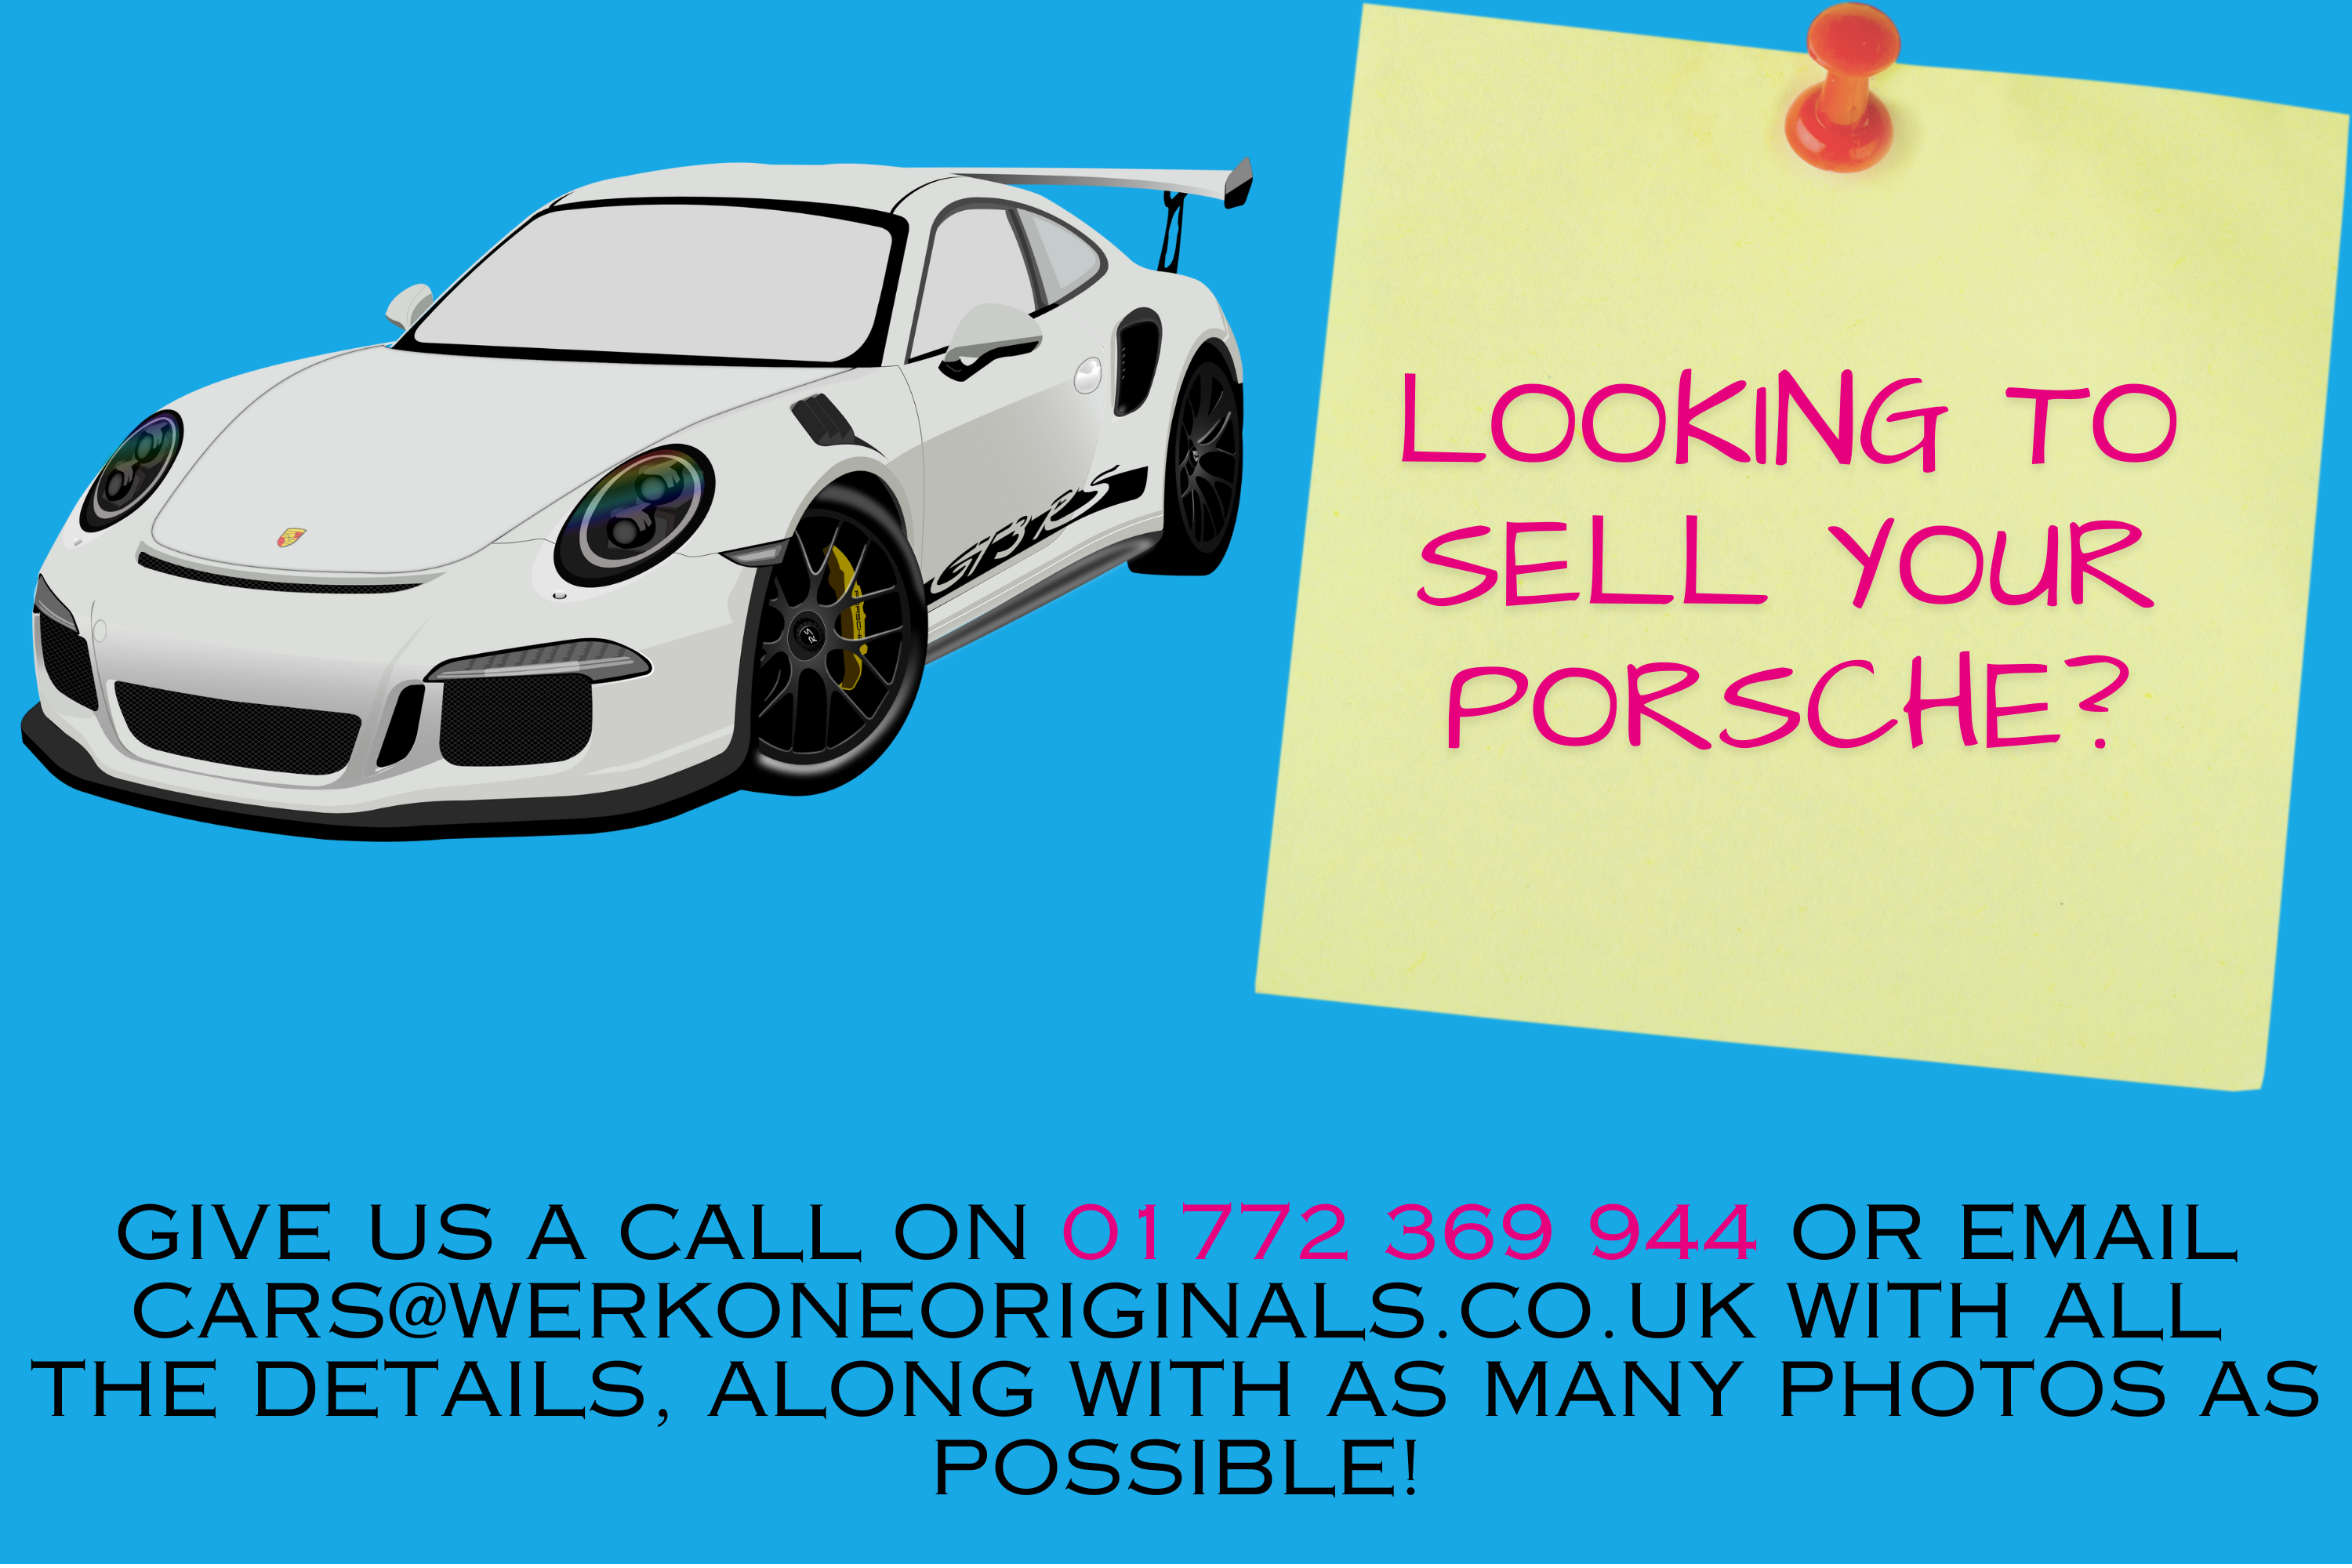 Looking to sell your Porsche?